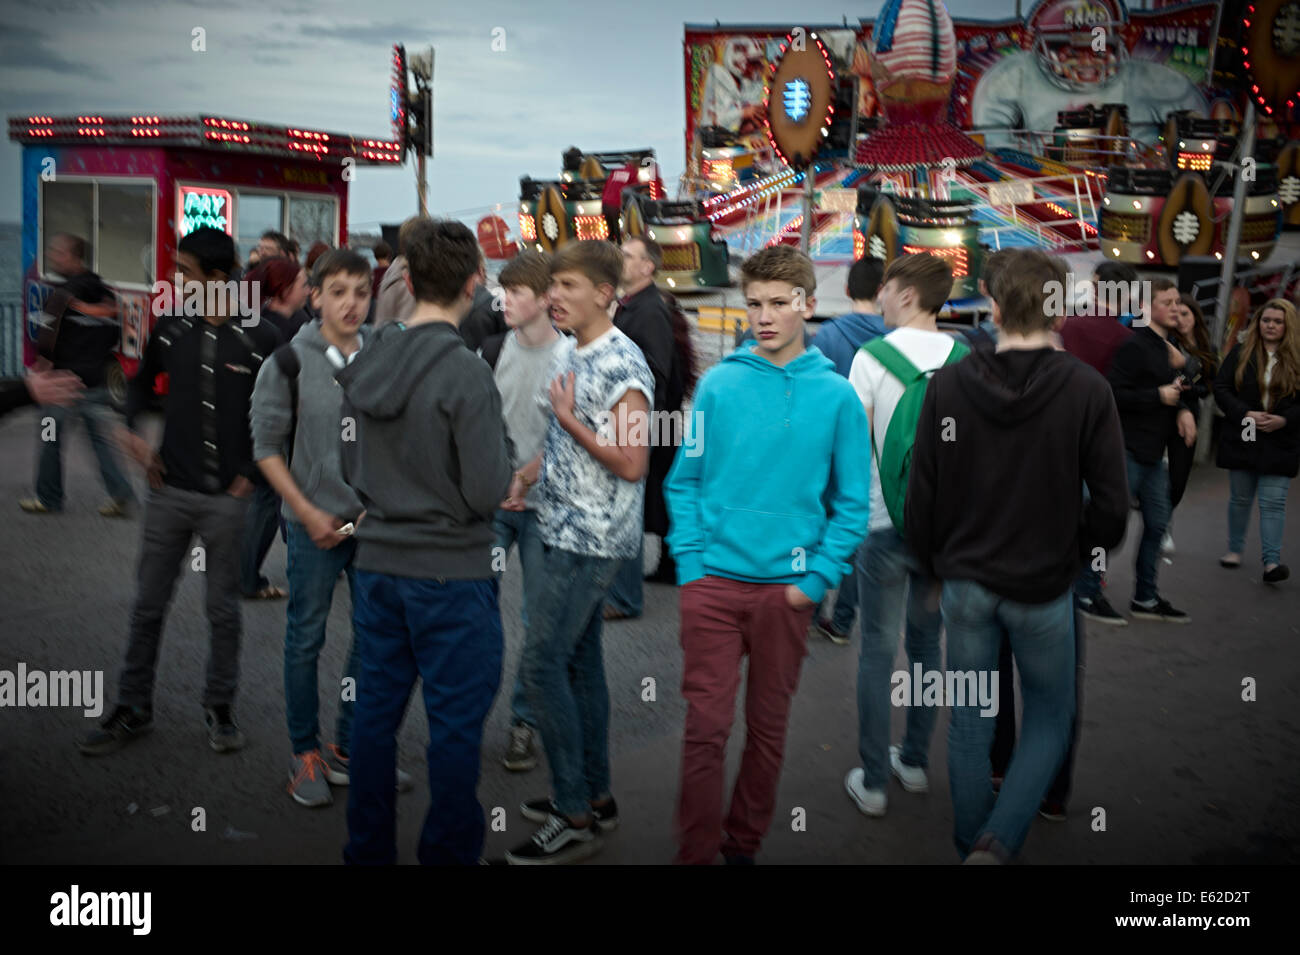 Teenage boys as a group at a funfair with one looking at camera Stock Photo